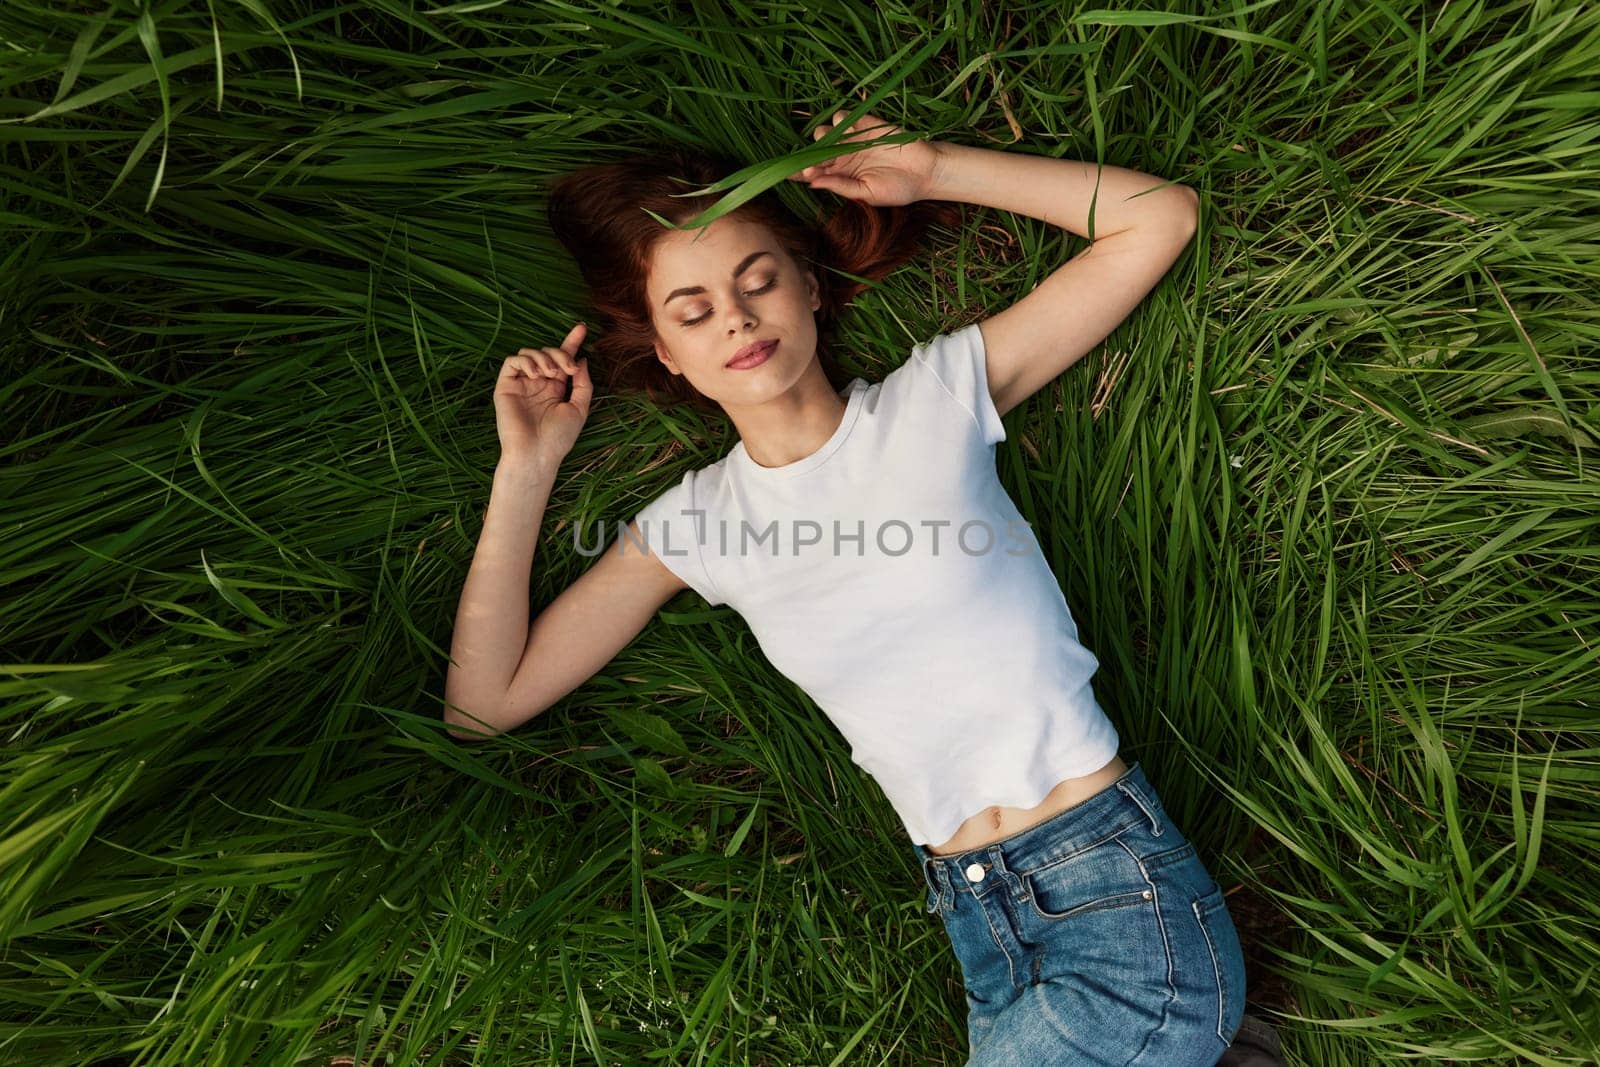 The young woman lies in a green bright grass i. High quality photo